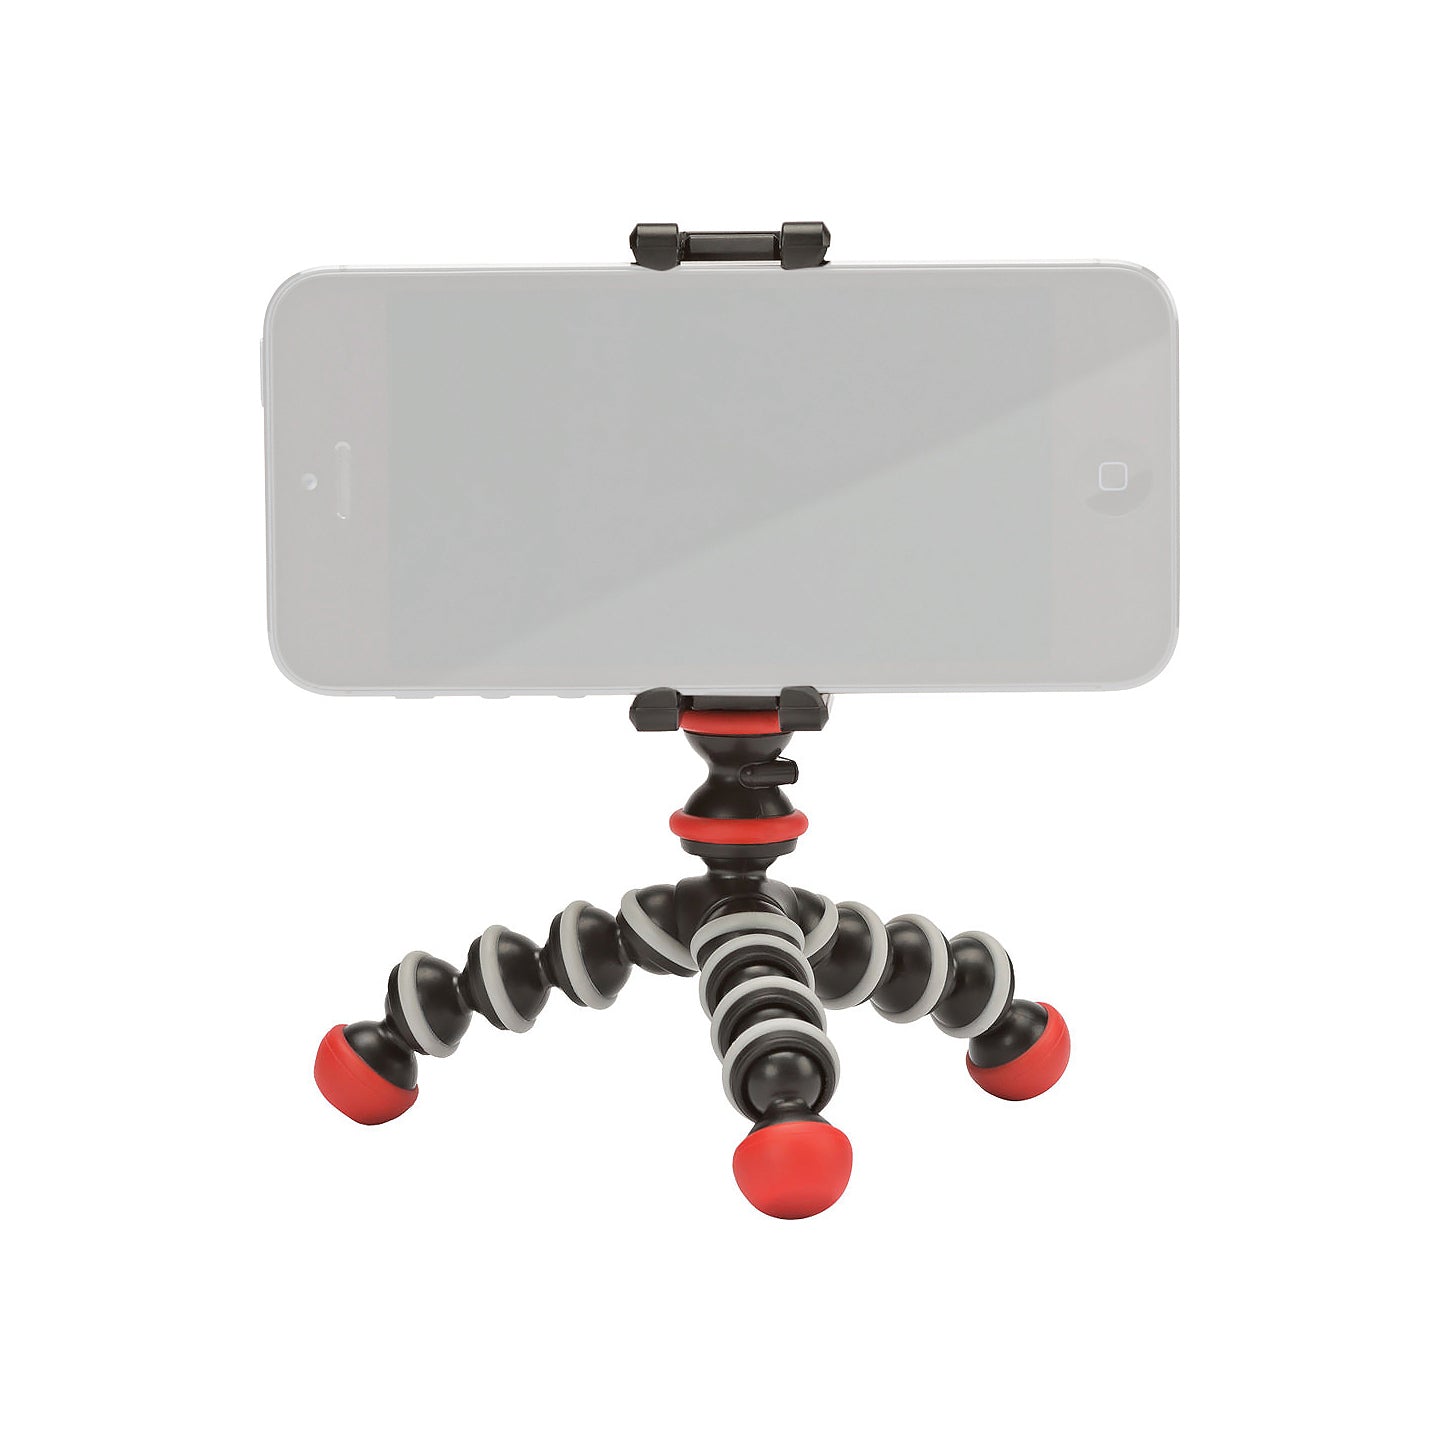 JOBY GPod Mini Magnetic Compact Tripod for Smartphones, Point & Shoot and Action Cameras | 1272